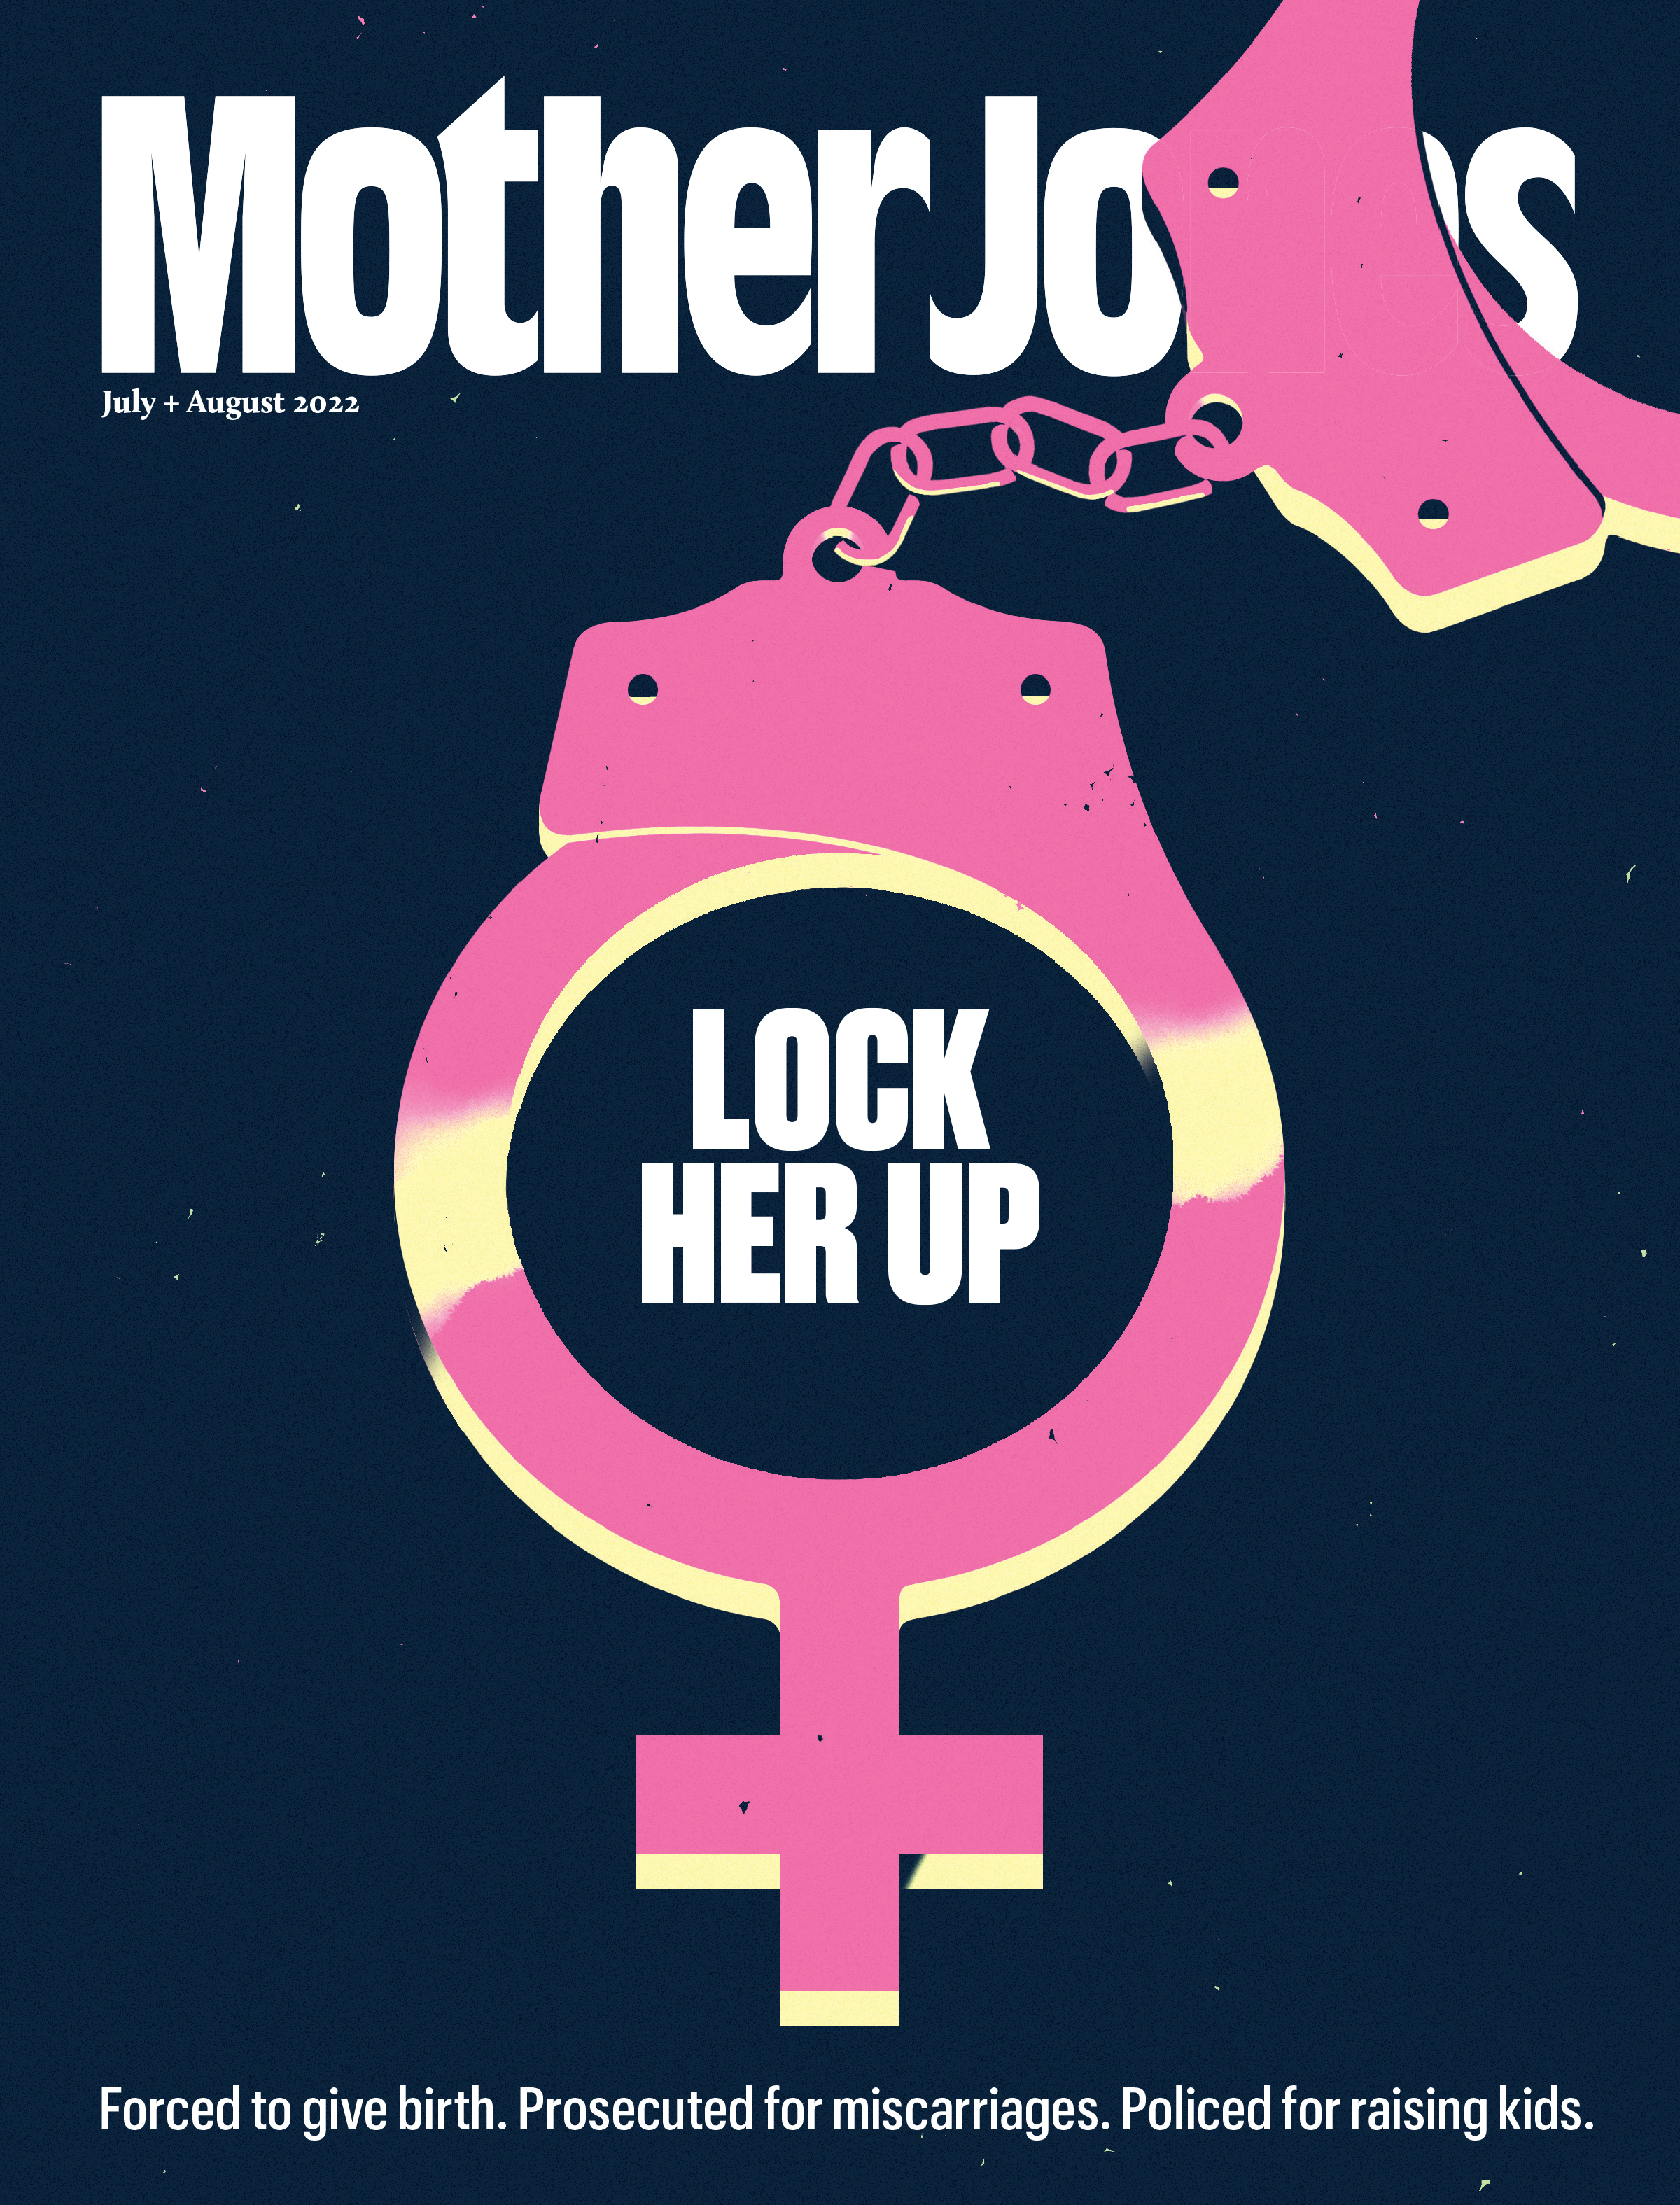 Mother Jones Magazine Cover : July + August 2022